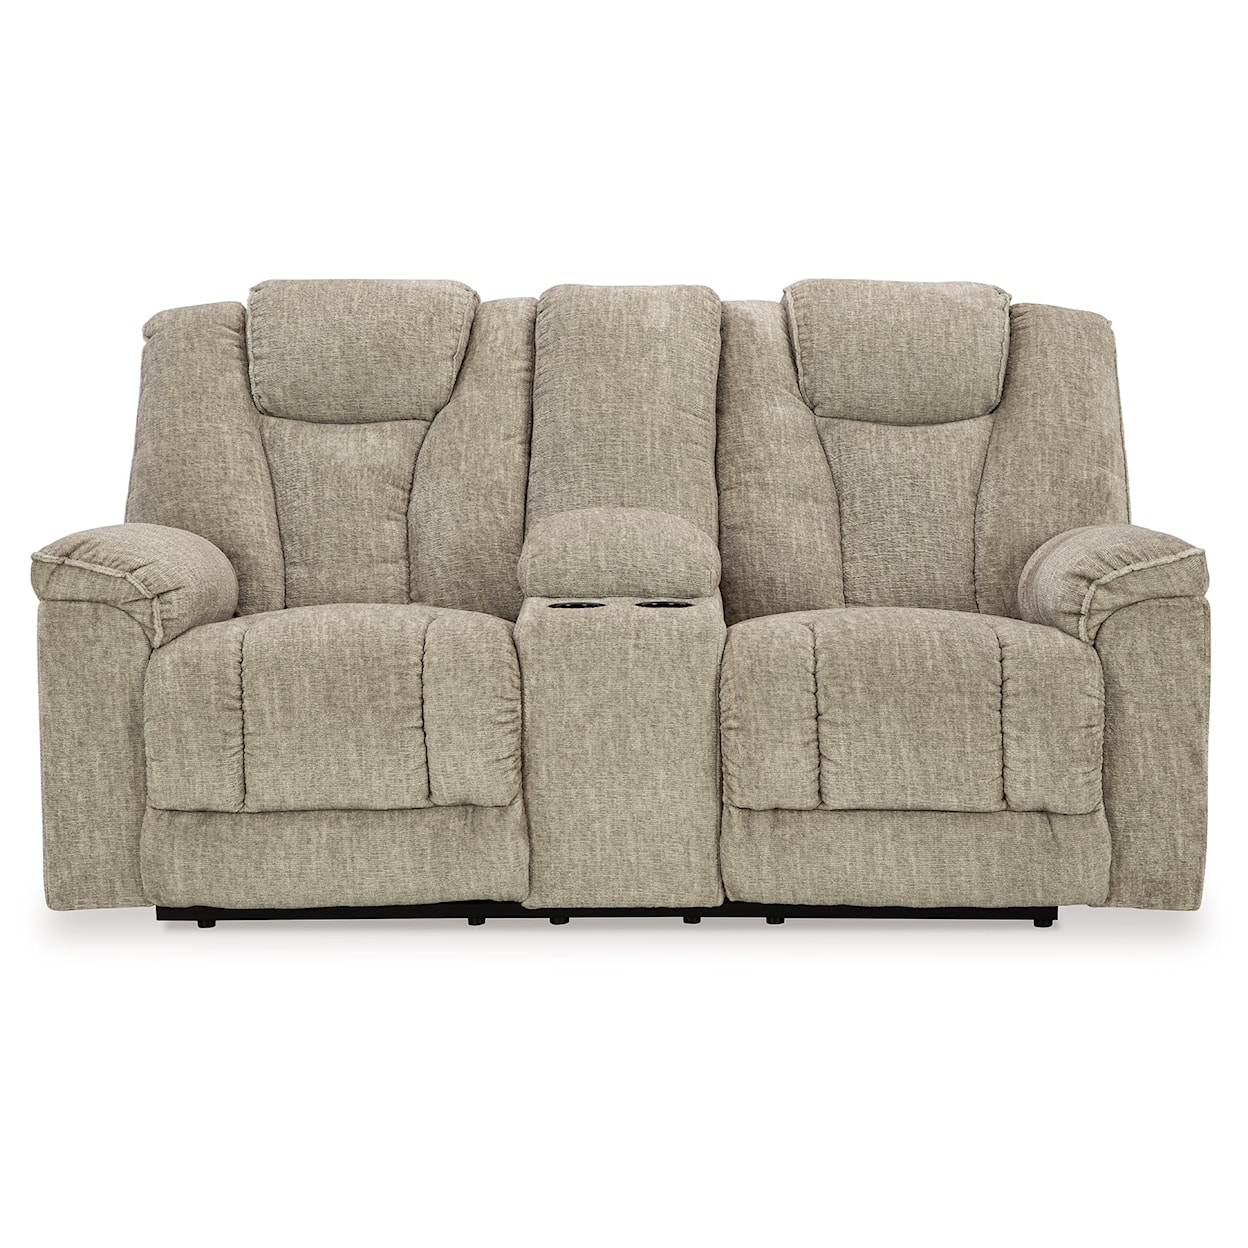 Michael Alan Select Hindmarsh Power Reclining Loveseat With Console